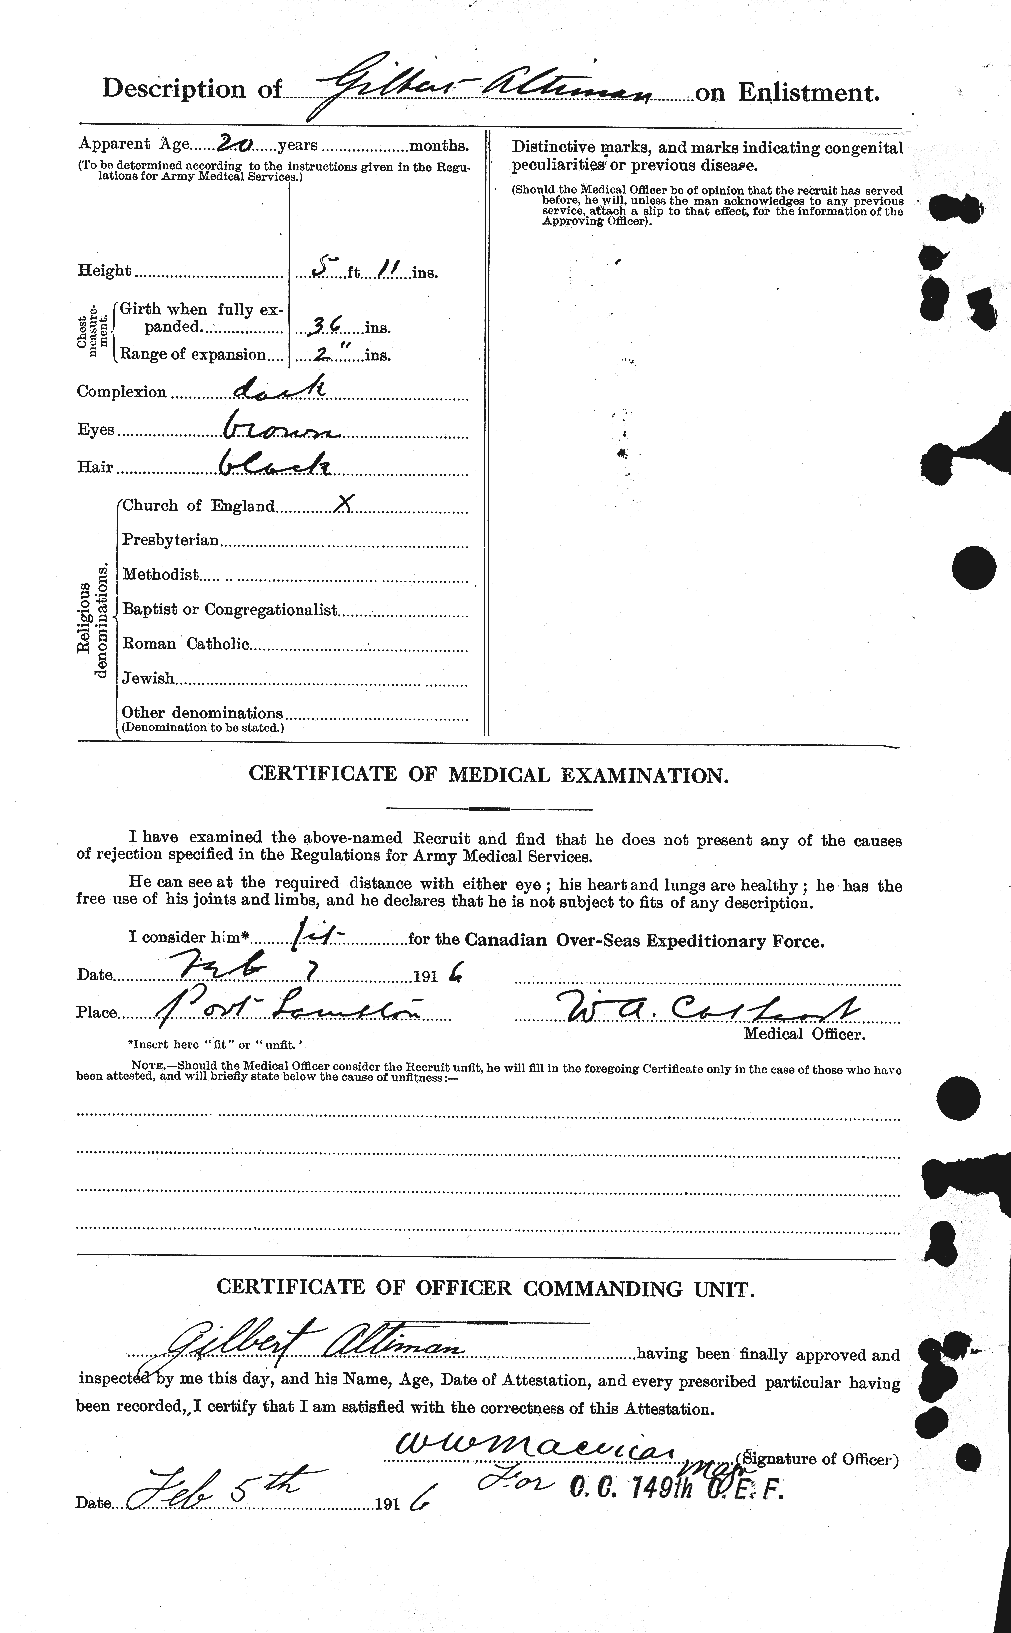 Personnel Records of the First World War - CEF 208138b